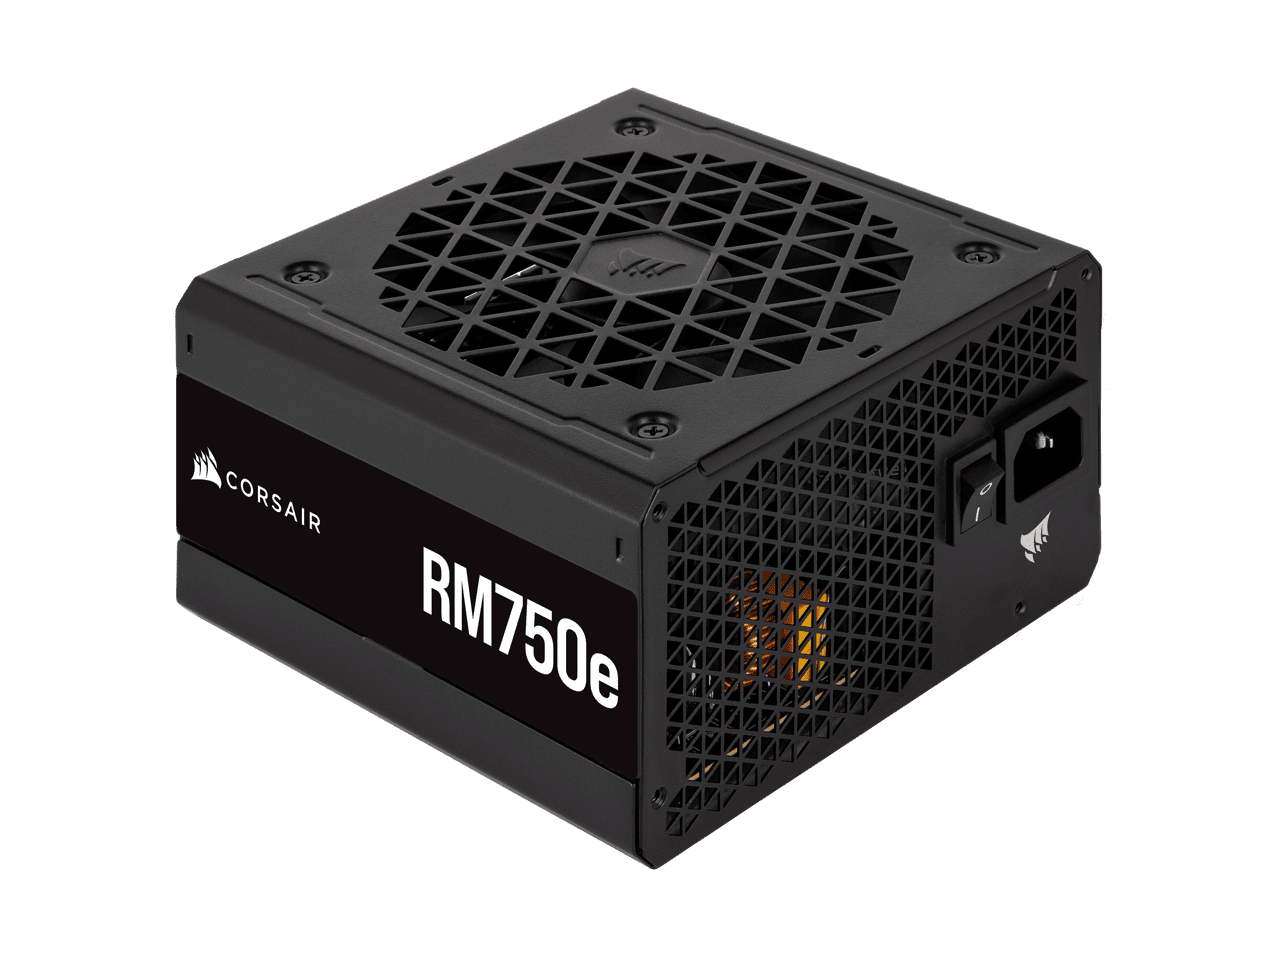 CORSAIR RM750e Fully Modular Low-Noise ATX Power Supply - ATX 3.0 & PCIe  5.0 Compliant - 105°C-Rated Capacitors - 80 PLUS Gold Efficiency - Modern  Standby Support 